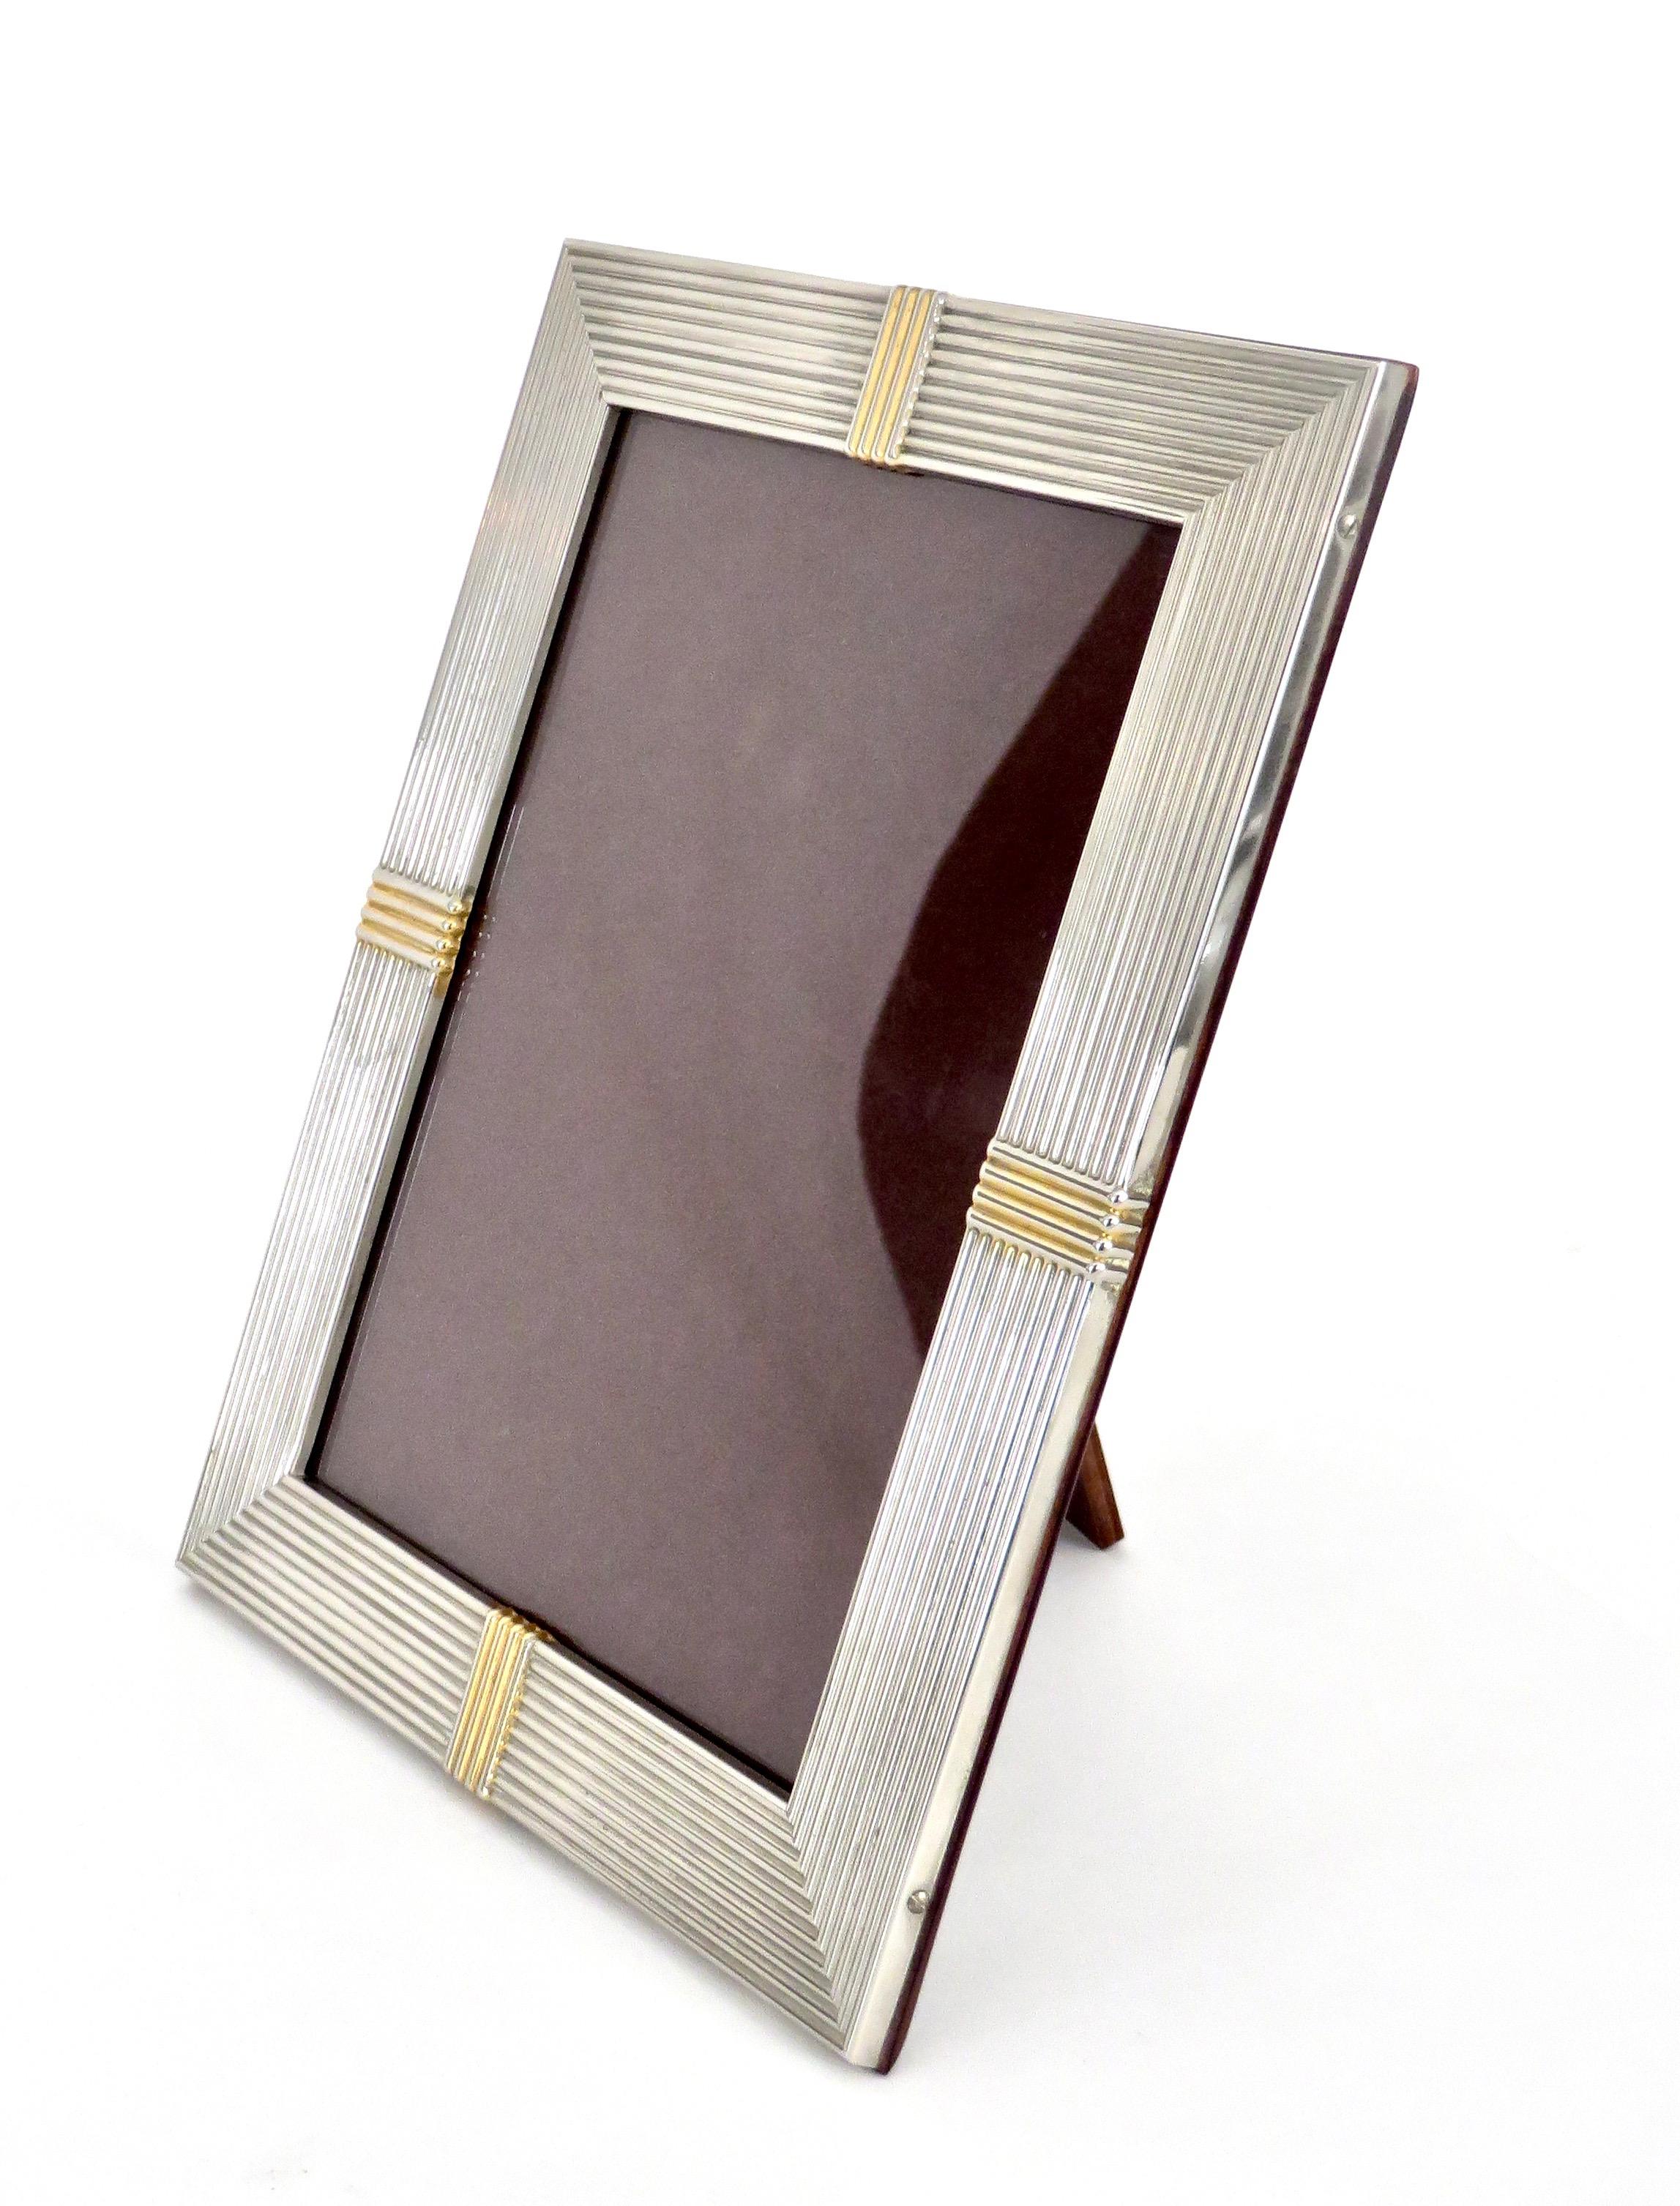 A Christian Dior French silver plate picture frame that is signed Christian Dior.
The decorative motifs are gold washed, circa 1970.
The frame has a mahogany wood back with the Dior signet.
Shown with a larger frame and vide poche.